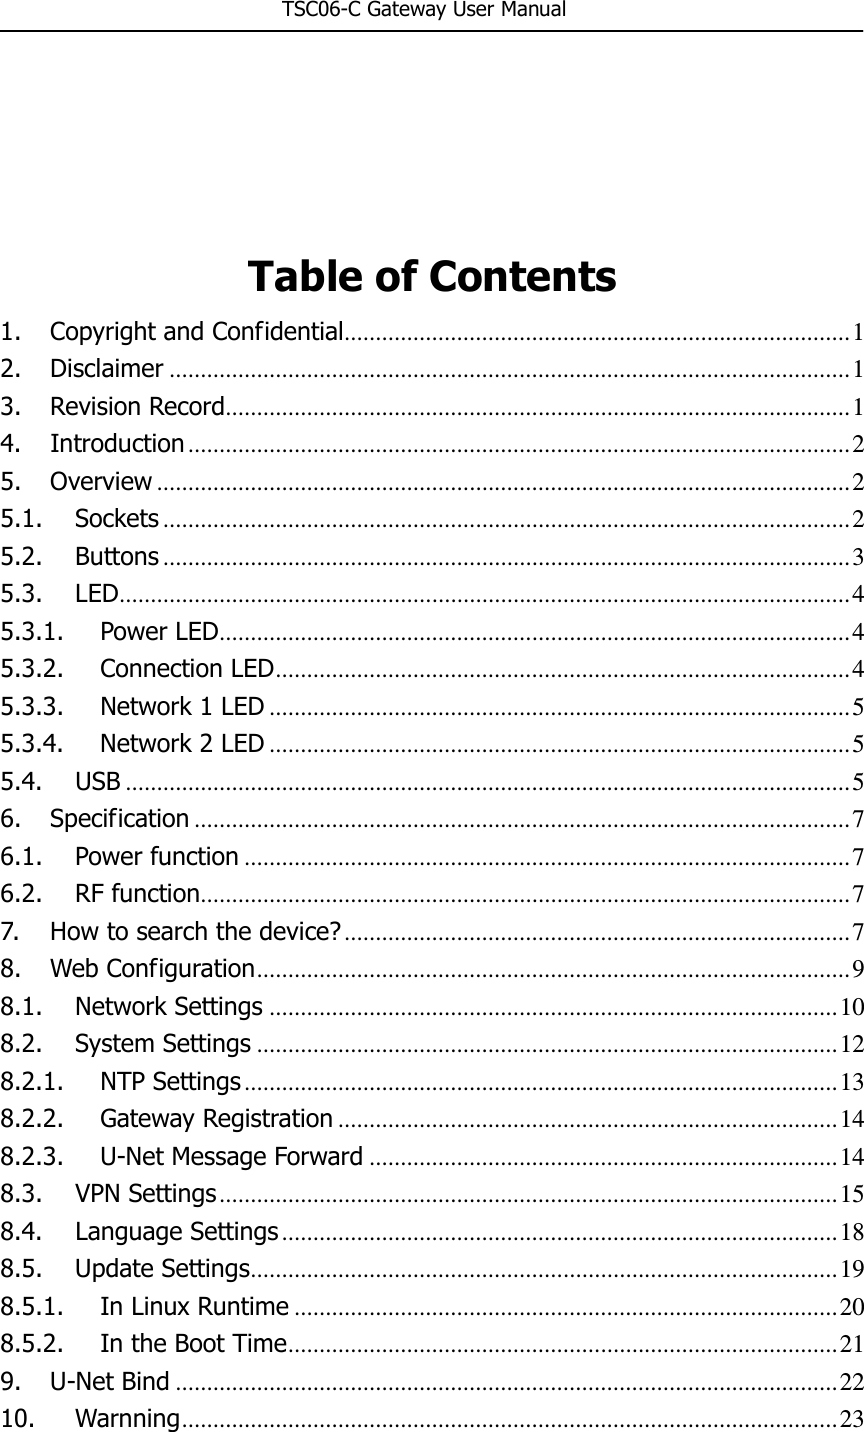                                                       TSC06-C Gateway User Manual     Table of Contents 1. Copyright and Confidential ................................................................................. 1 2. Disclaimer ............................................................................................................. 1 3. Revision Record .................................................................................................... 1 4. Introduction .......................................................................................................... 2 5. Overview ............................................................................................................... 2 5.1. Sockets .............................................................................................................. 2 5.2. Buttons .............................................................................................................. 3 5.3. LED ..................................................................................................................... 4 5.3.1. Power LED ..................................................................................................... 4 5.3.2. Connection LED ............................................................................................ 4 5.3.3. Network 1 LED ............................................................................................. 5 5.3.4. Network 2 LED ............................................................................................. 5 5.4. USB .................................................................................................................... 5 6. Specification ......................................................................................................... 7 6.1. Power function ................................................................................................. 7 6.2. RF function ........................................................................................................ 7 7. How to search the device? ................................................................................. 7 8. Web Configuration ............................................................................................... 9 8.1. Network Settings ........................................................................................... 10 8.2. System Settings ............................................................................................. 12 8.2.1. NTP Settings ............................................................................................... 13 8.2.2. Gateway Registration ................................................................................ 14 8.2.3. U-Net Message Forward ........................................................................... 14 8.3. VPN Settings ................................................................................................... 15 8.4. Language Settings ......................................................................................... 18 8.5. Update Settings .............................................................................................. 19 8.5.1. In Linux Runtime ....................................................................................... 20 8.5.2. In the Boot Time ........................................................................................ 21 9. U-Net Bind .......................................................................................................... 22 10. Warnning ......................................................................................................... 23 